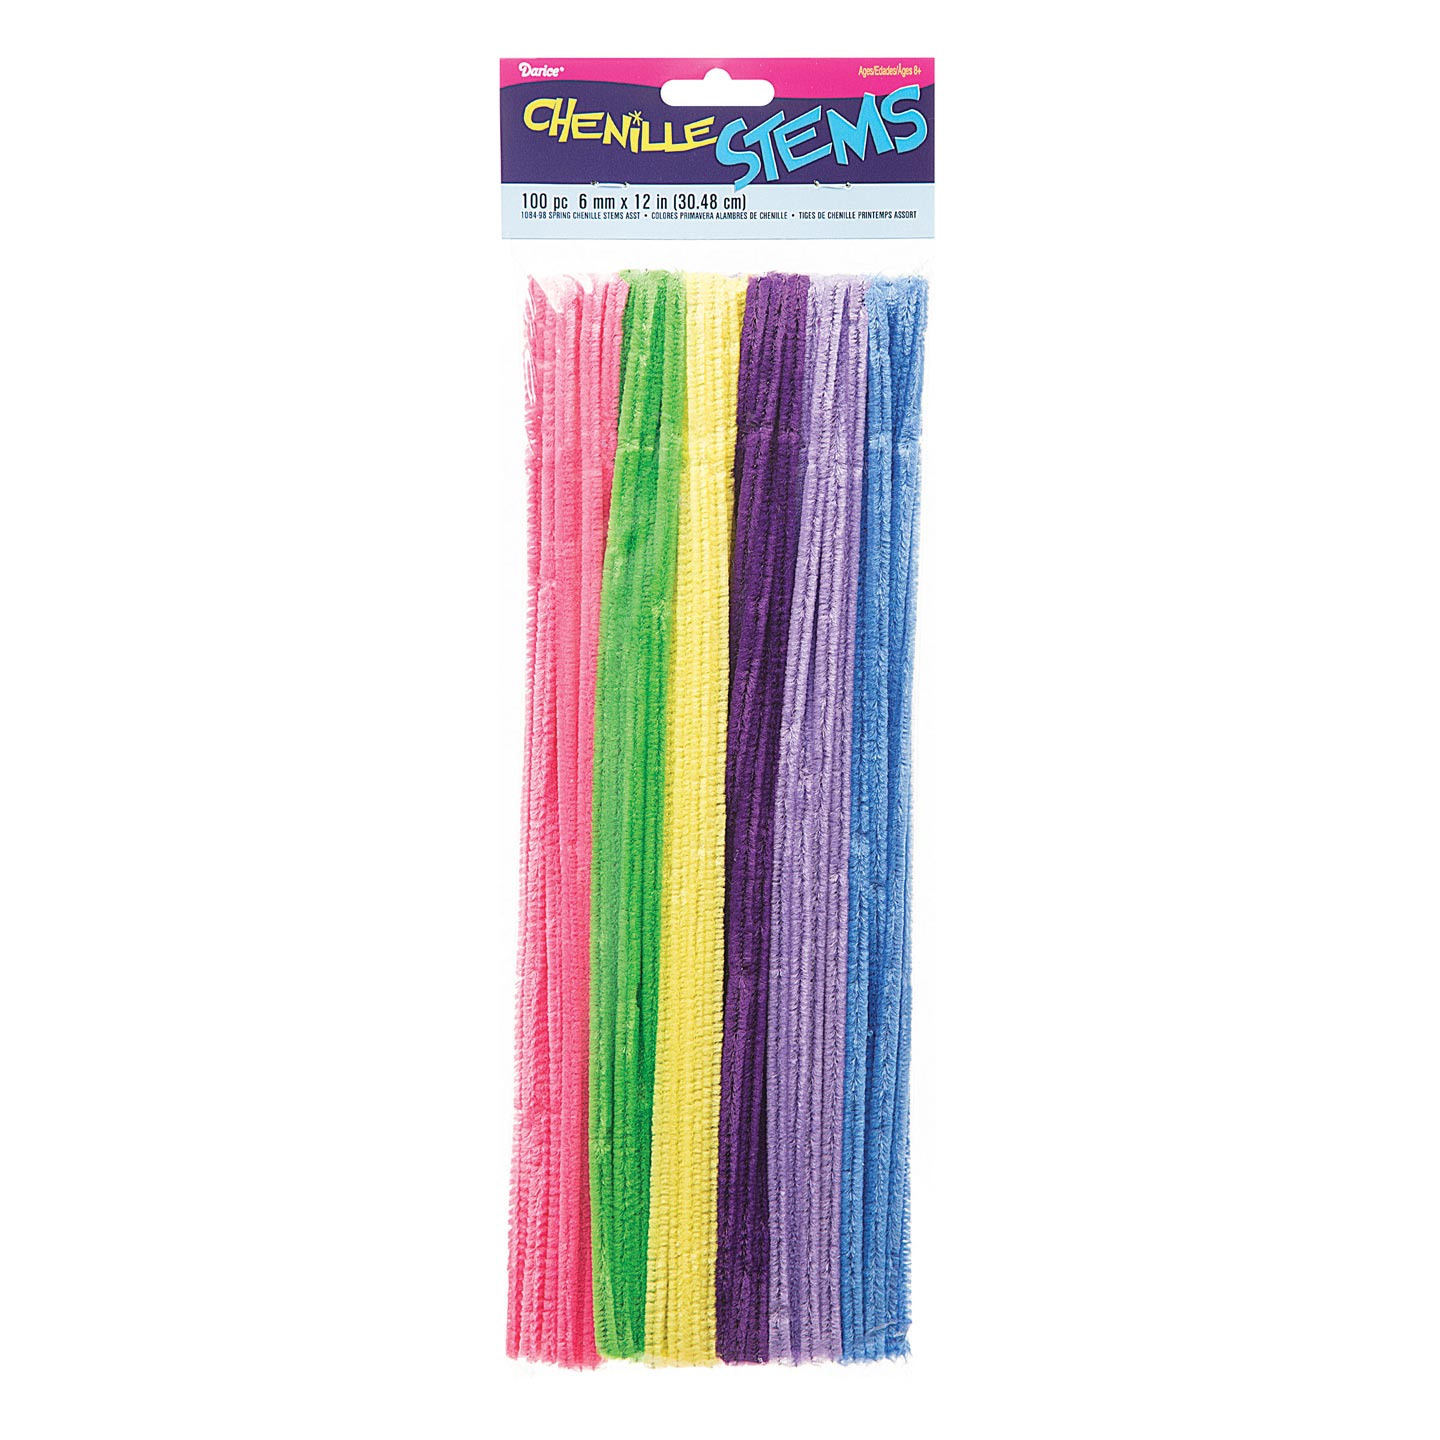 10-1000 x WHITE chenille craft stems pipe cleaners 30cm 6mm wide long 12" 